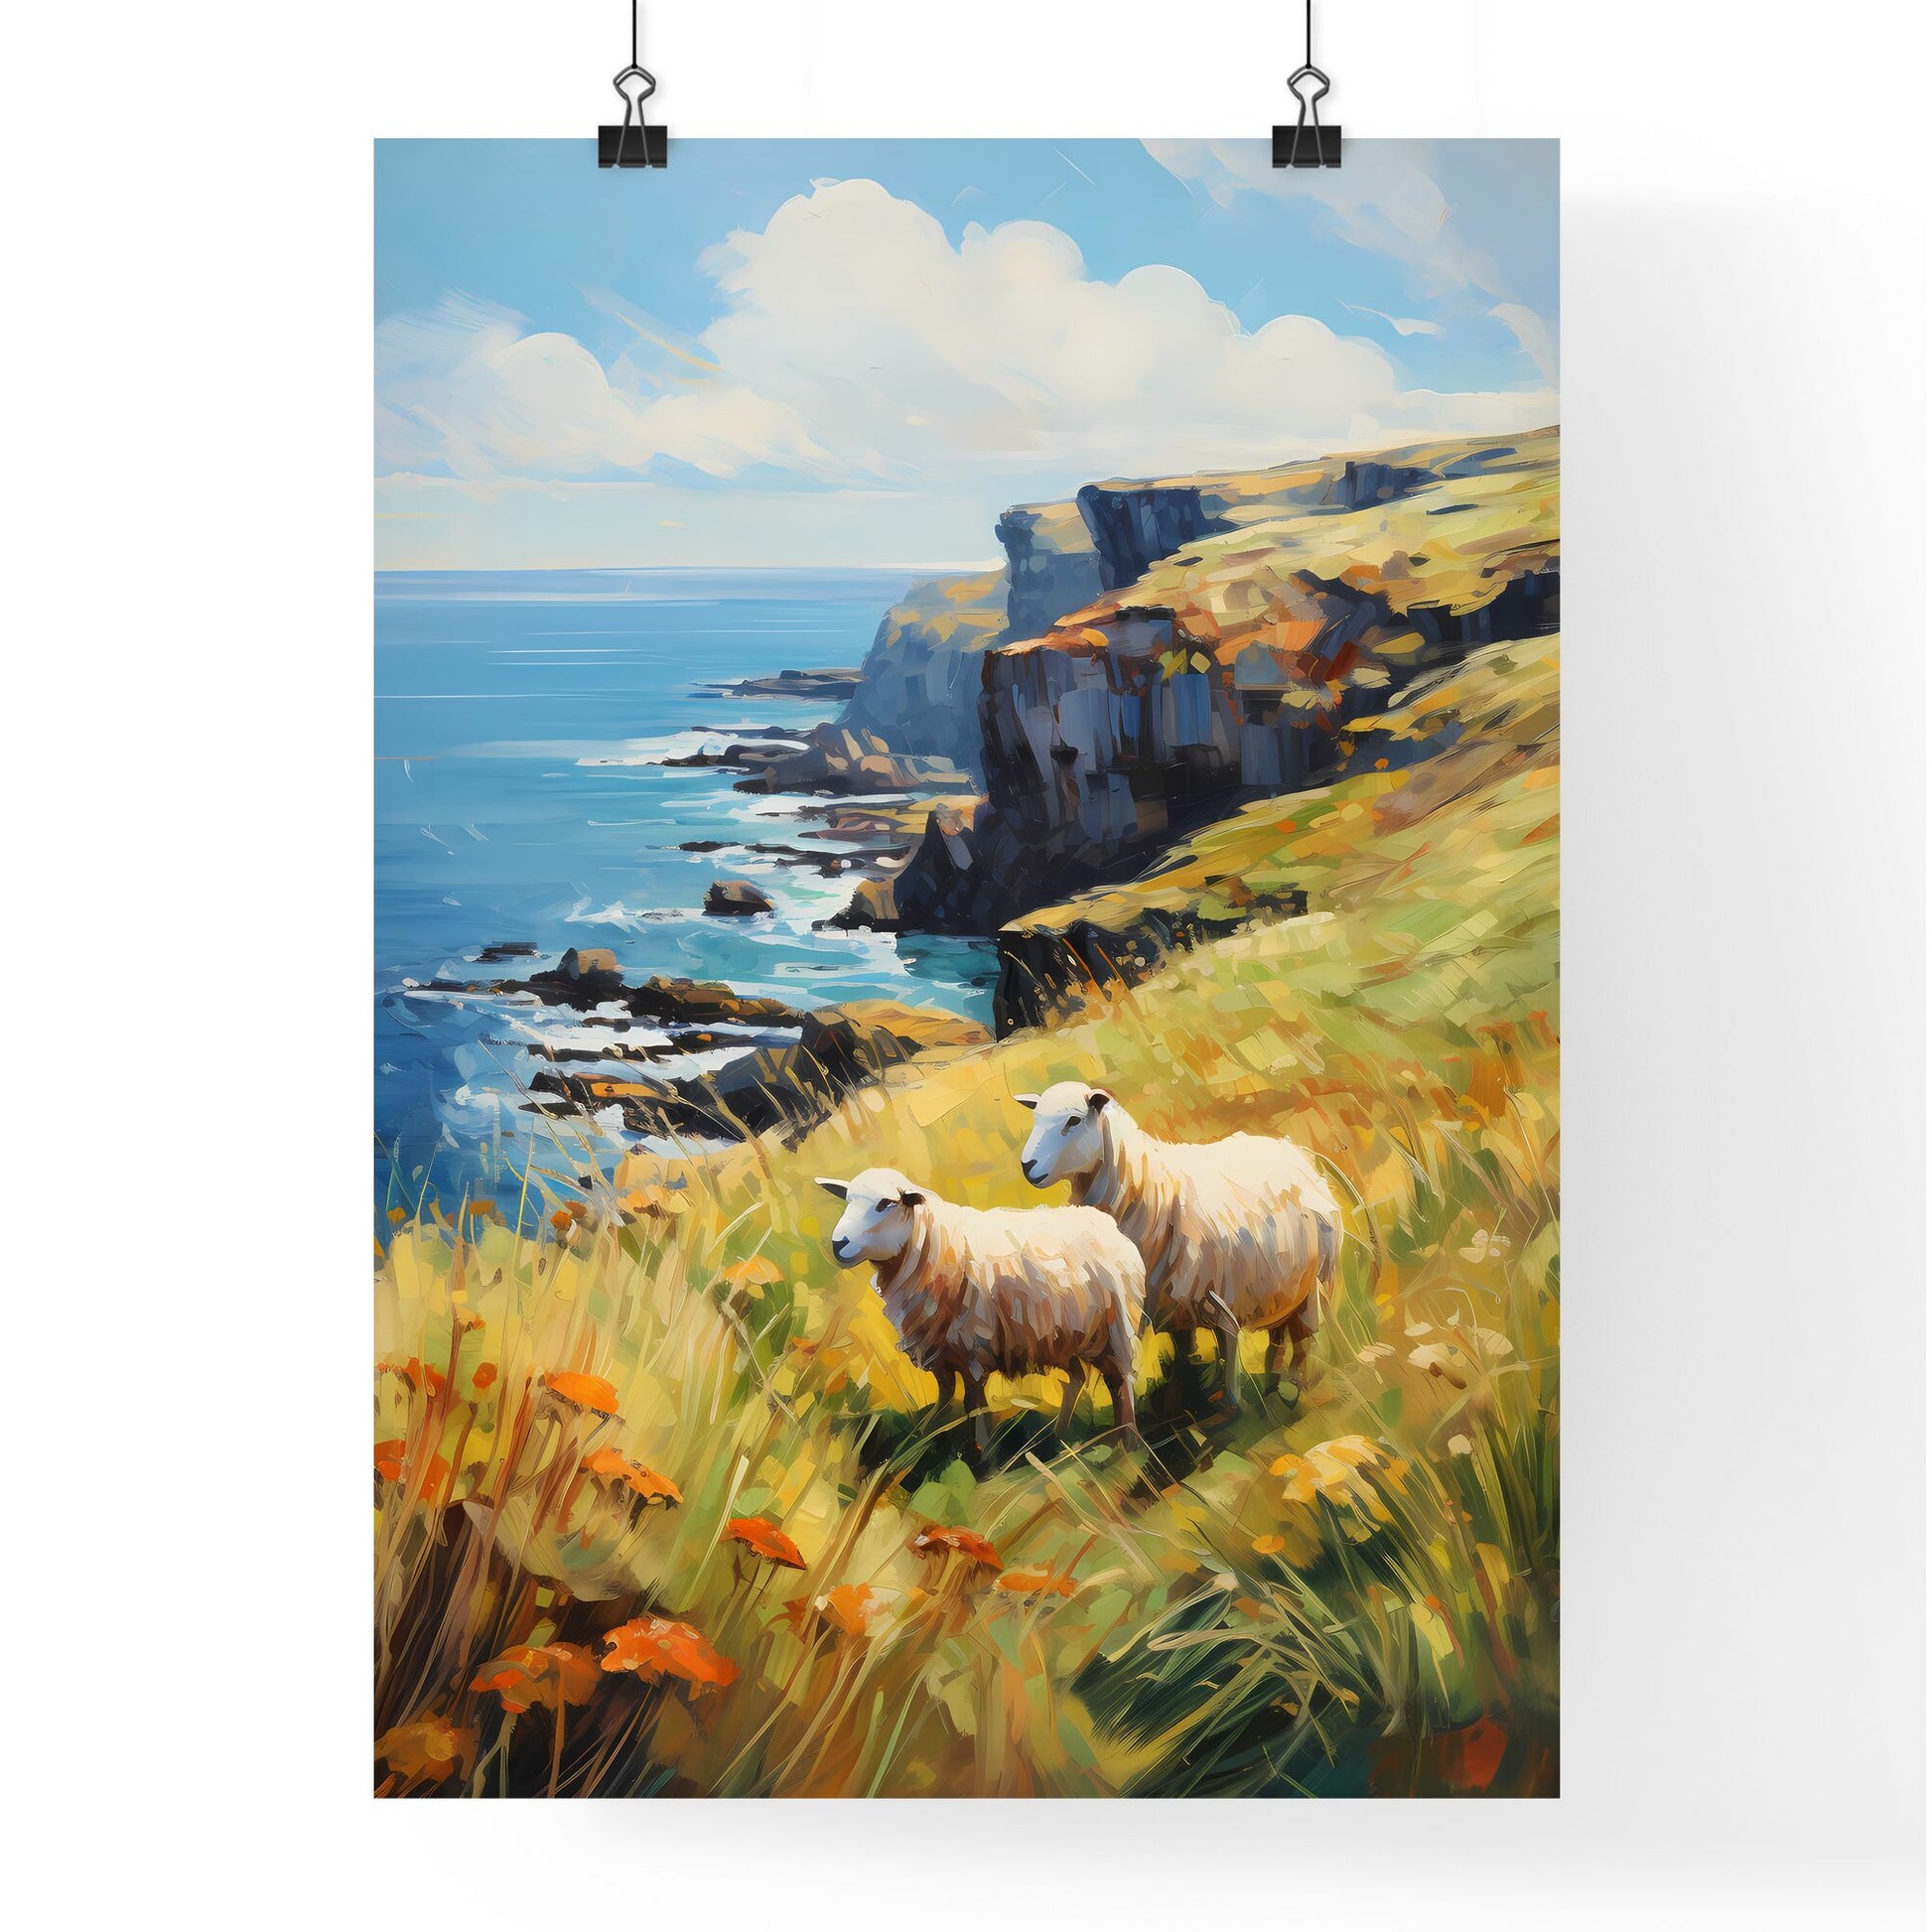 Sheep On Northern Ireland Coast - A Couple Of Sheep On A Cliff Overlooking A Body Of Water Default Title